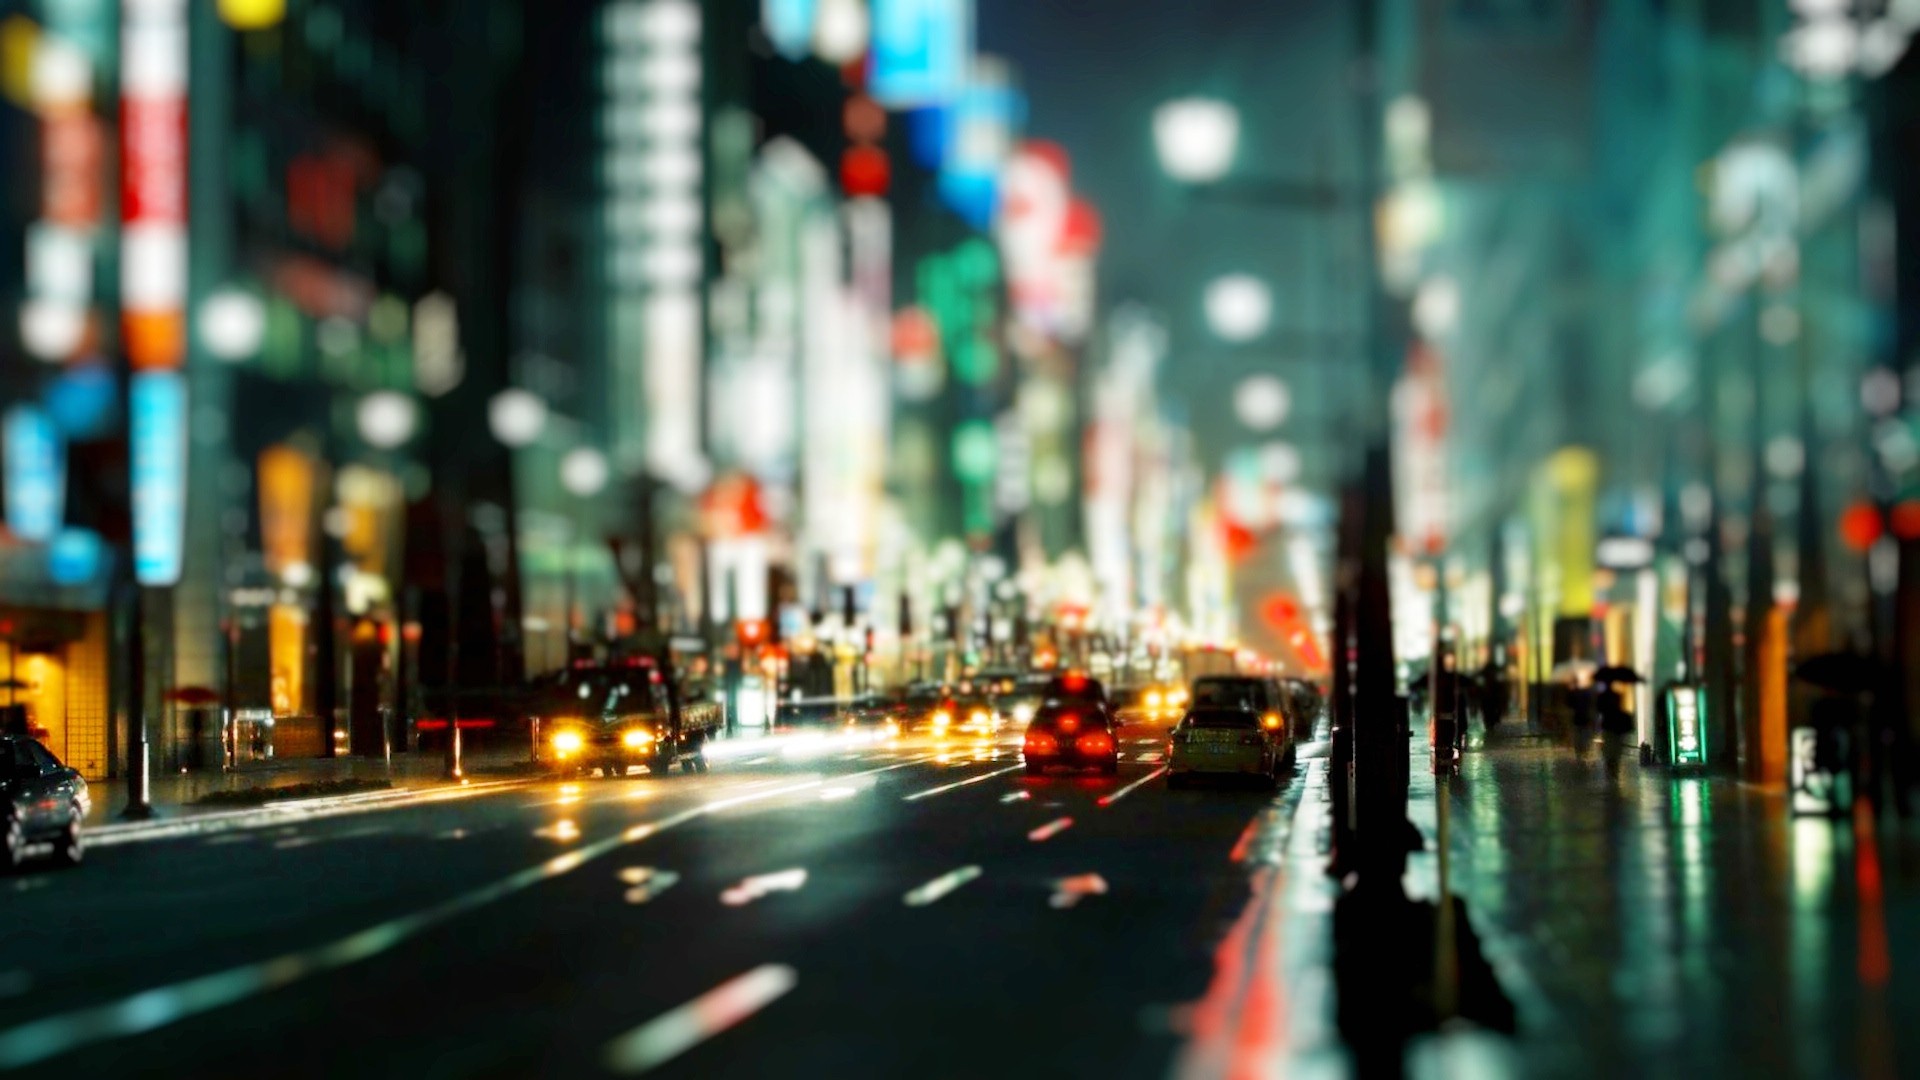 Cityscapes Streets Wallpaper 1920x1080 Cityscapes Streets Night